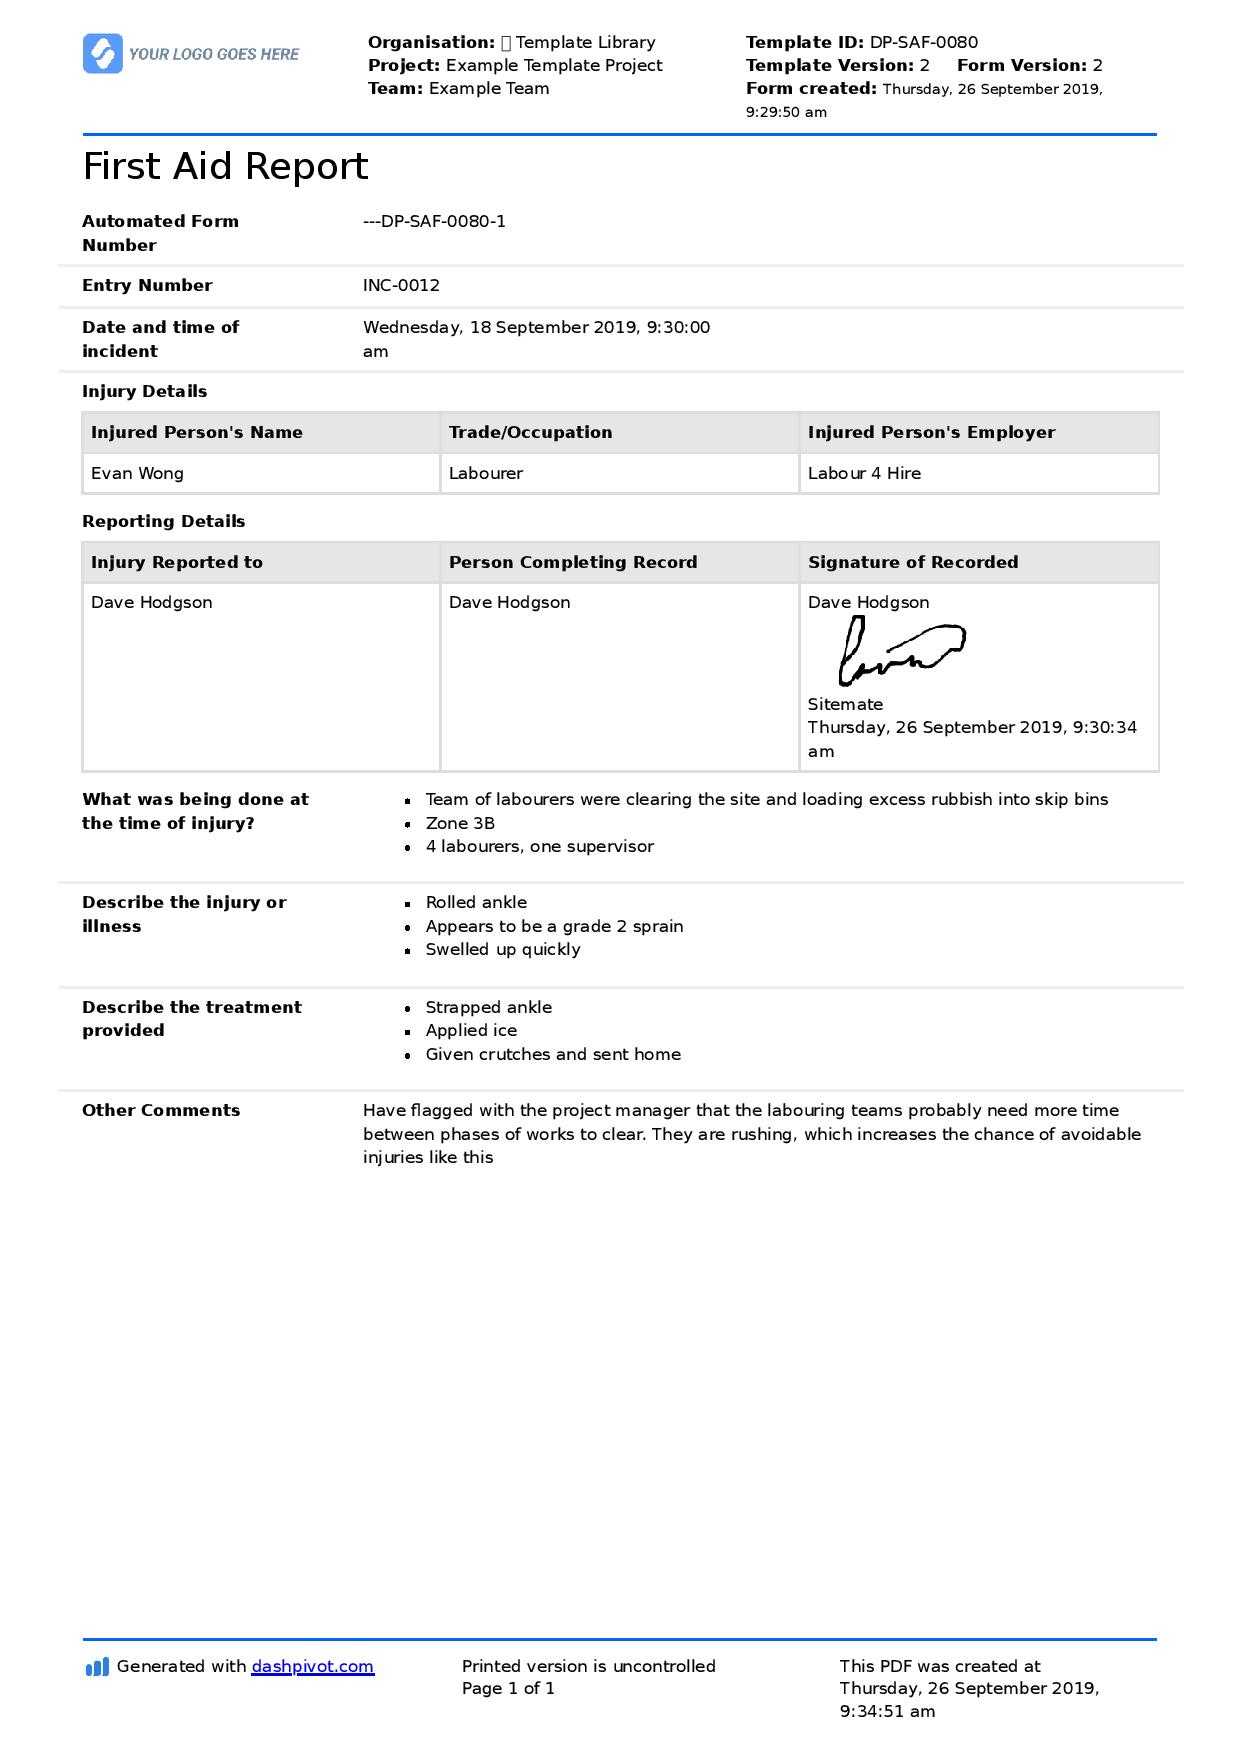 First Aid Report Form Template (Free To Use, Better Than Pdf) In First Aid Incident Report Form Template